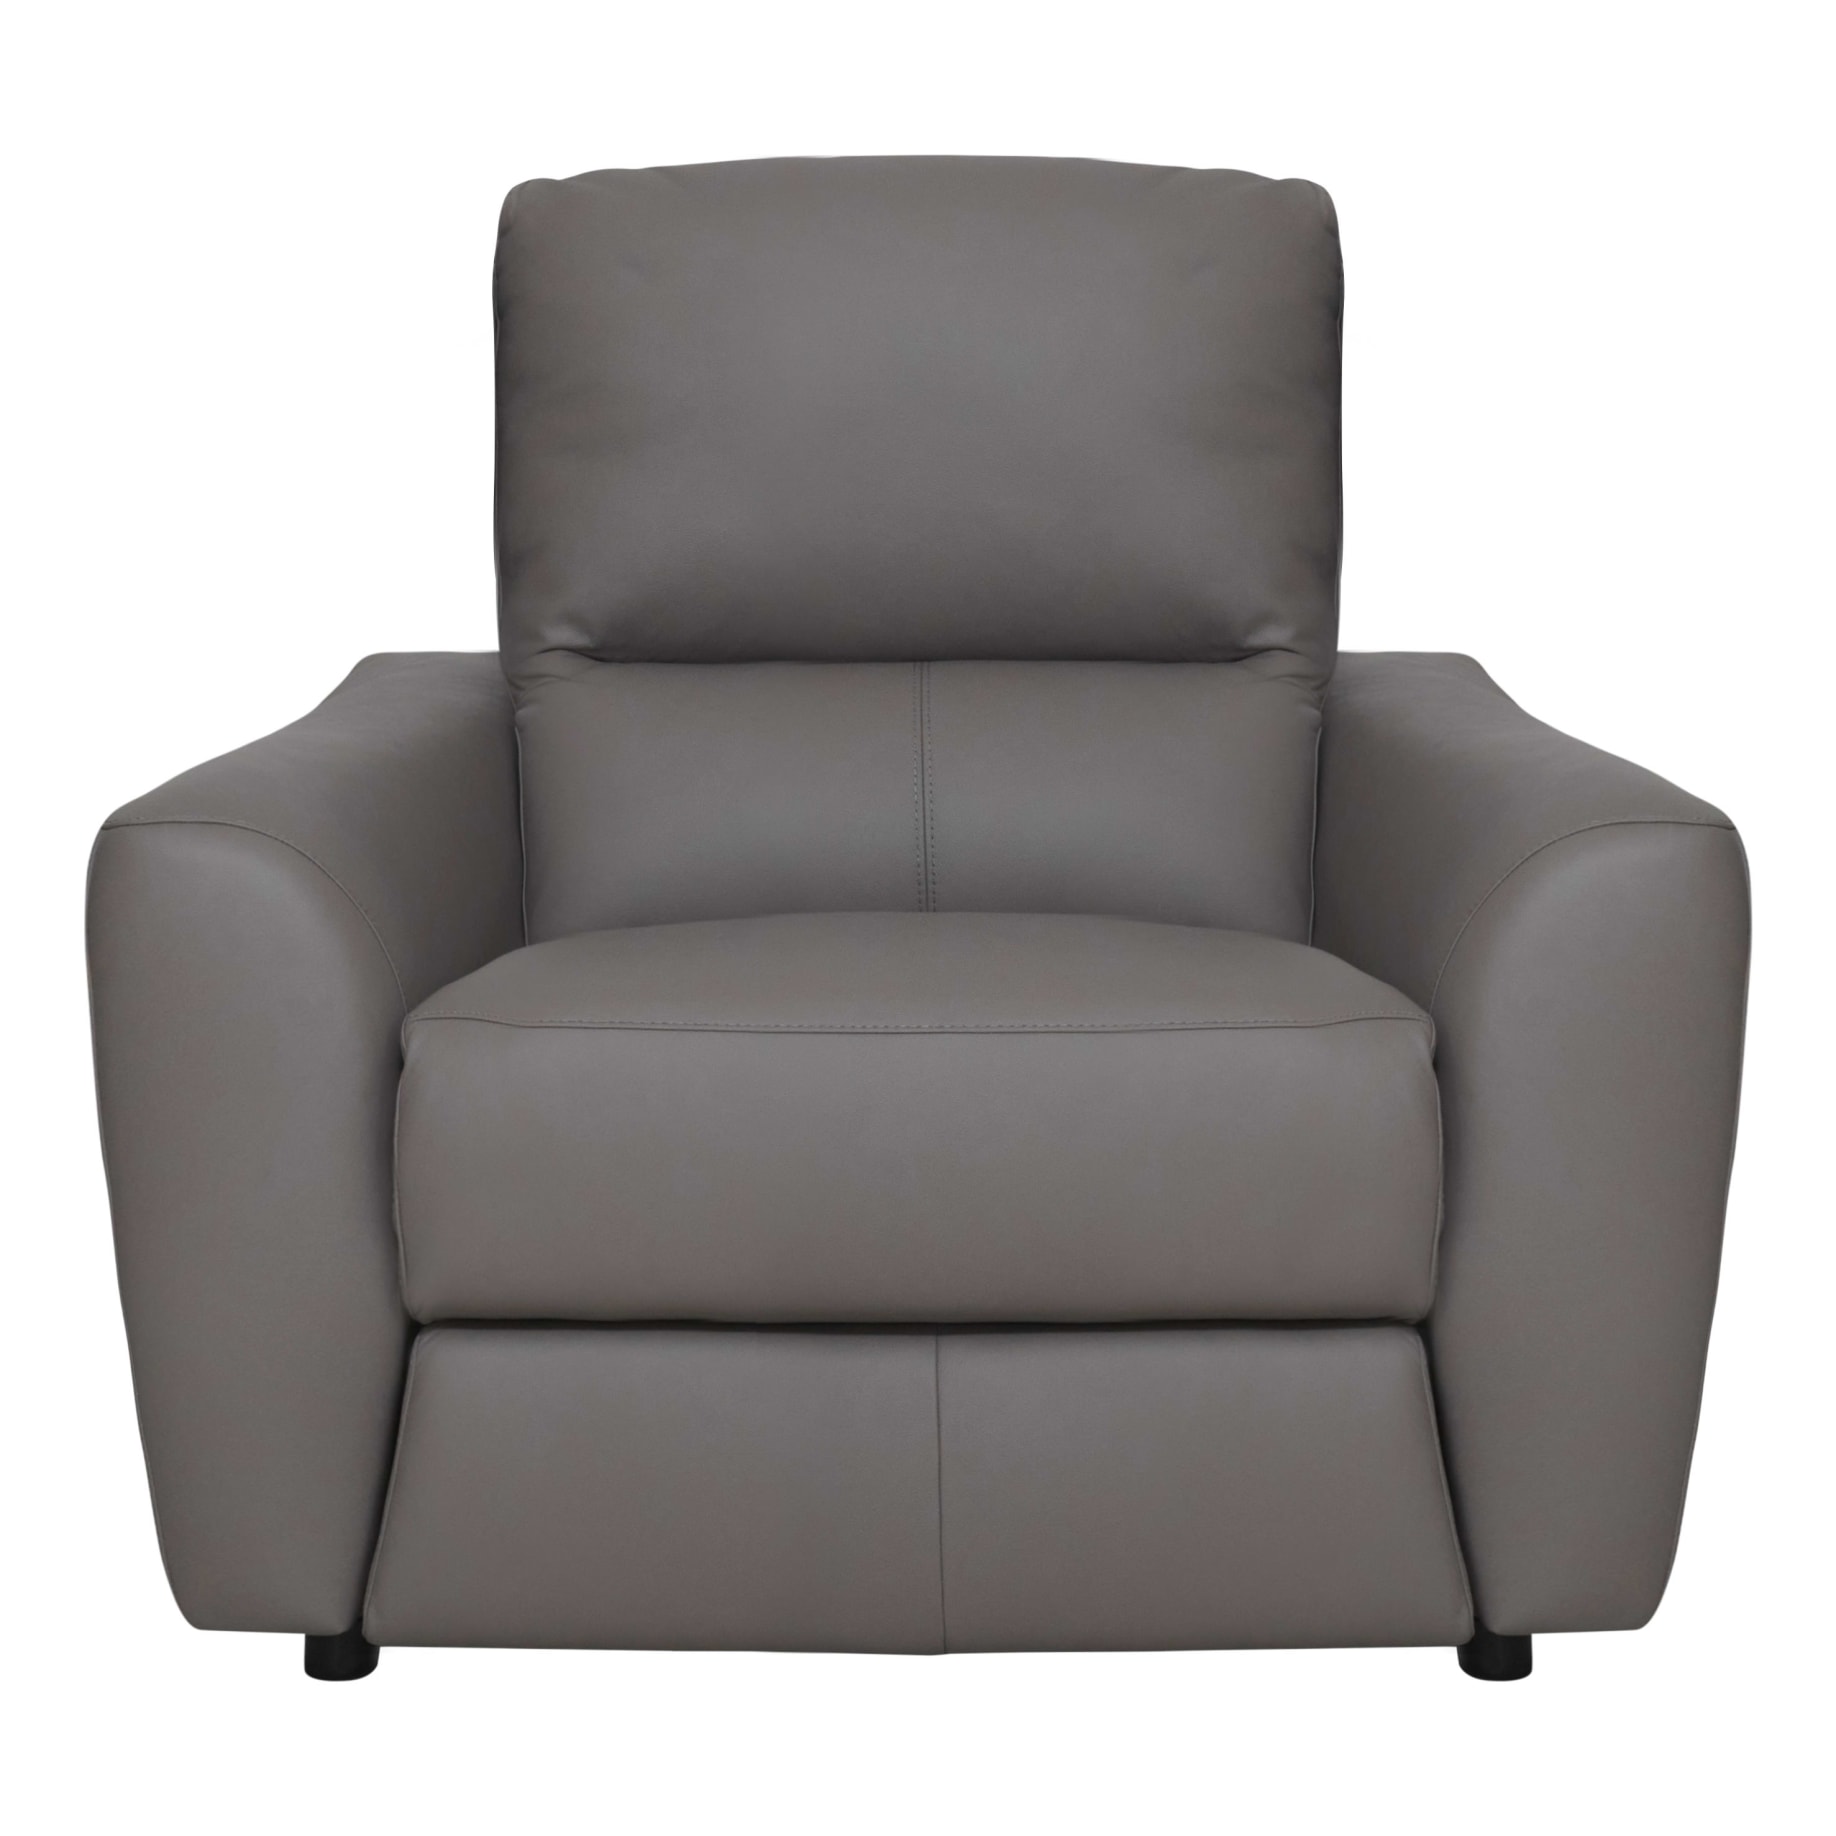 Portland Recliner Armchair in Leather Grey